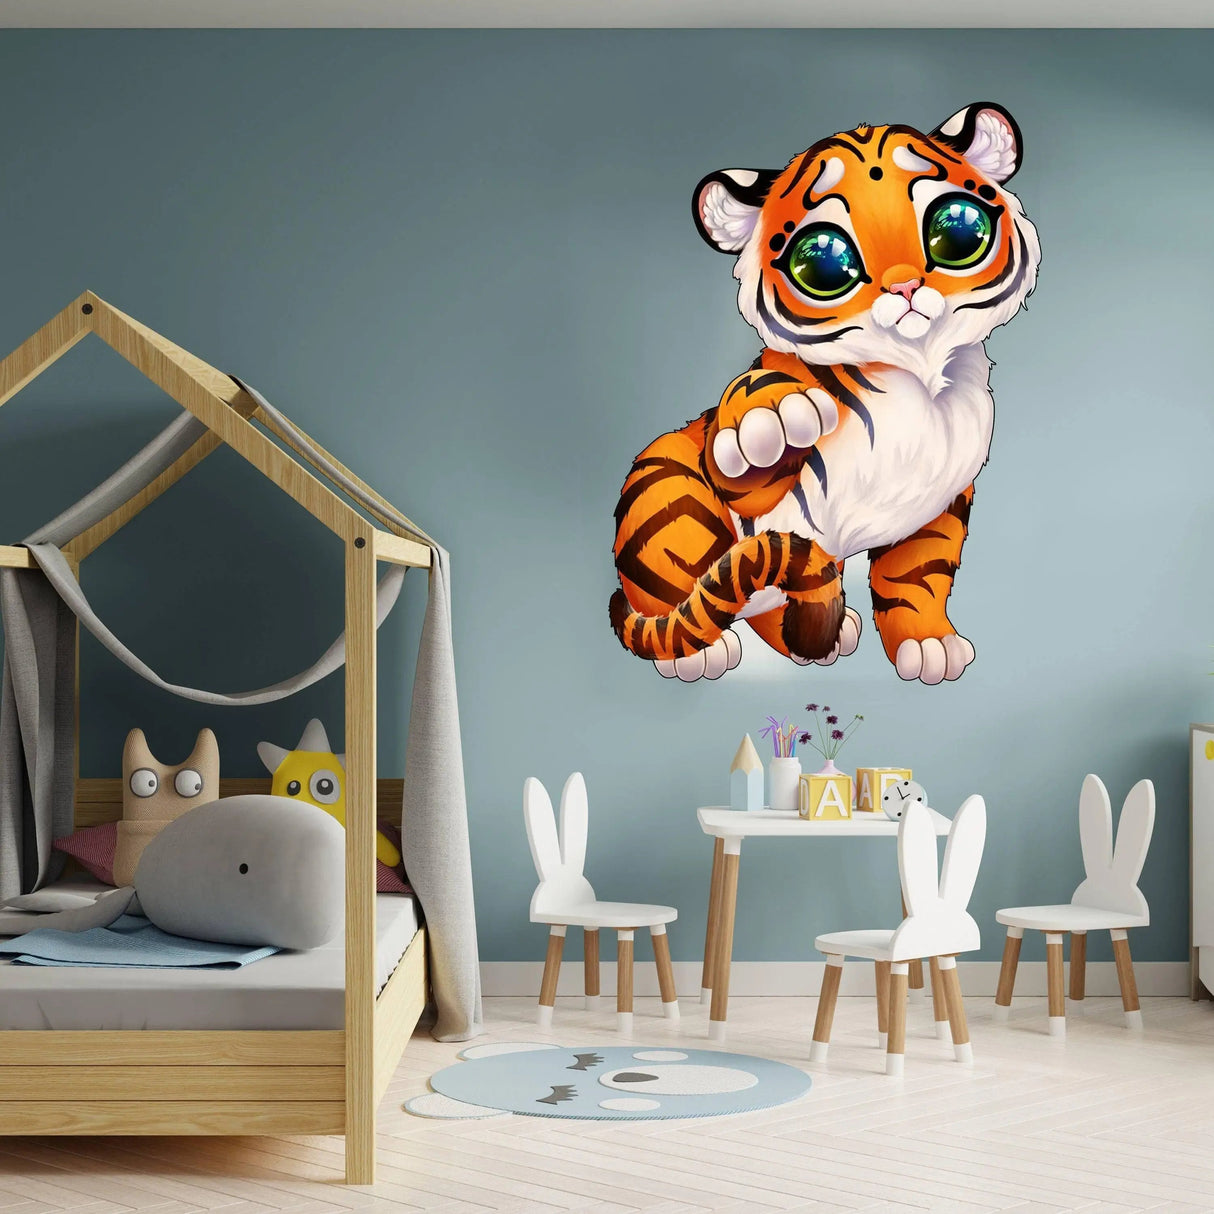 Cute Tiger Wall Sticker - Baby Kid Toddler Little Animal Decoration Decal - Reusable Vinyl Art Decor For Boy - Removable Waterproof Decals - Decords